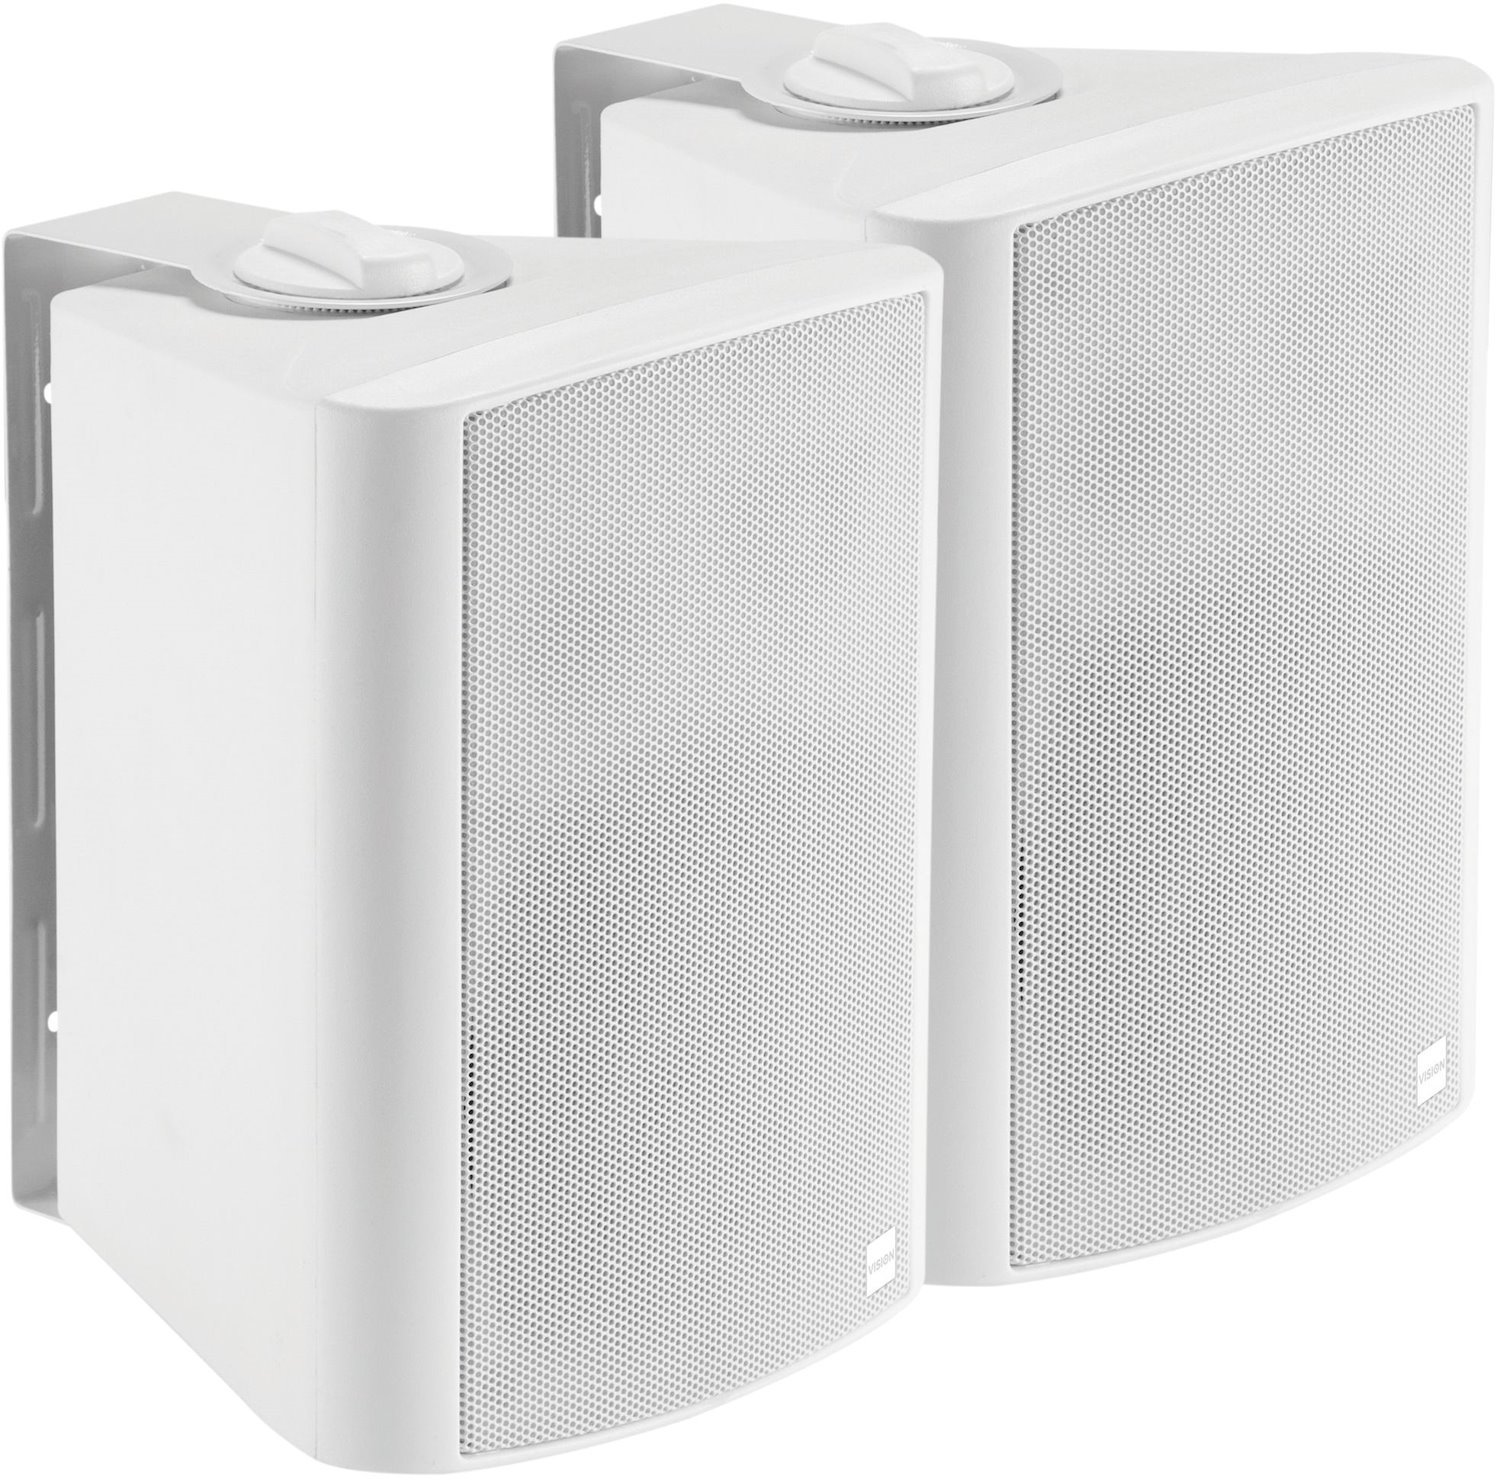 Vision SP-900P Loudspeaker 2-Way White Wired 30 W (Vision Professional Active 5.25 Wall Speakers - Lifetime Warranty - 2 X 15W [RMS] - 2-Way - 1 X Minijack Input / 1 X 2-Phono Input [Summed] - Interna